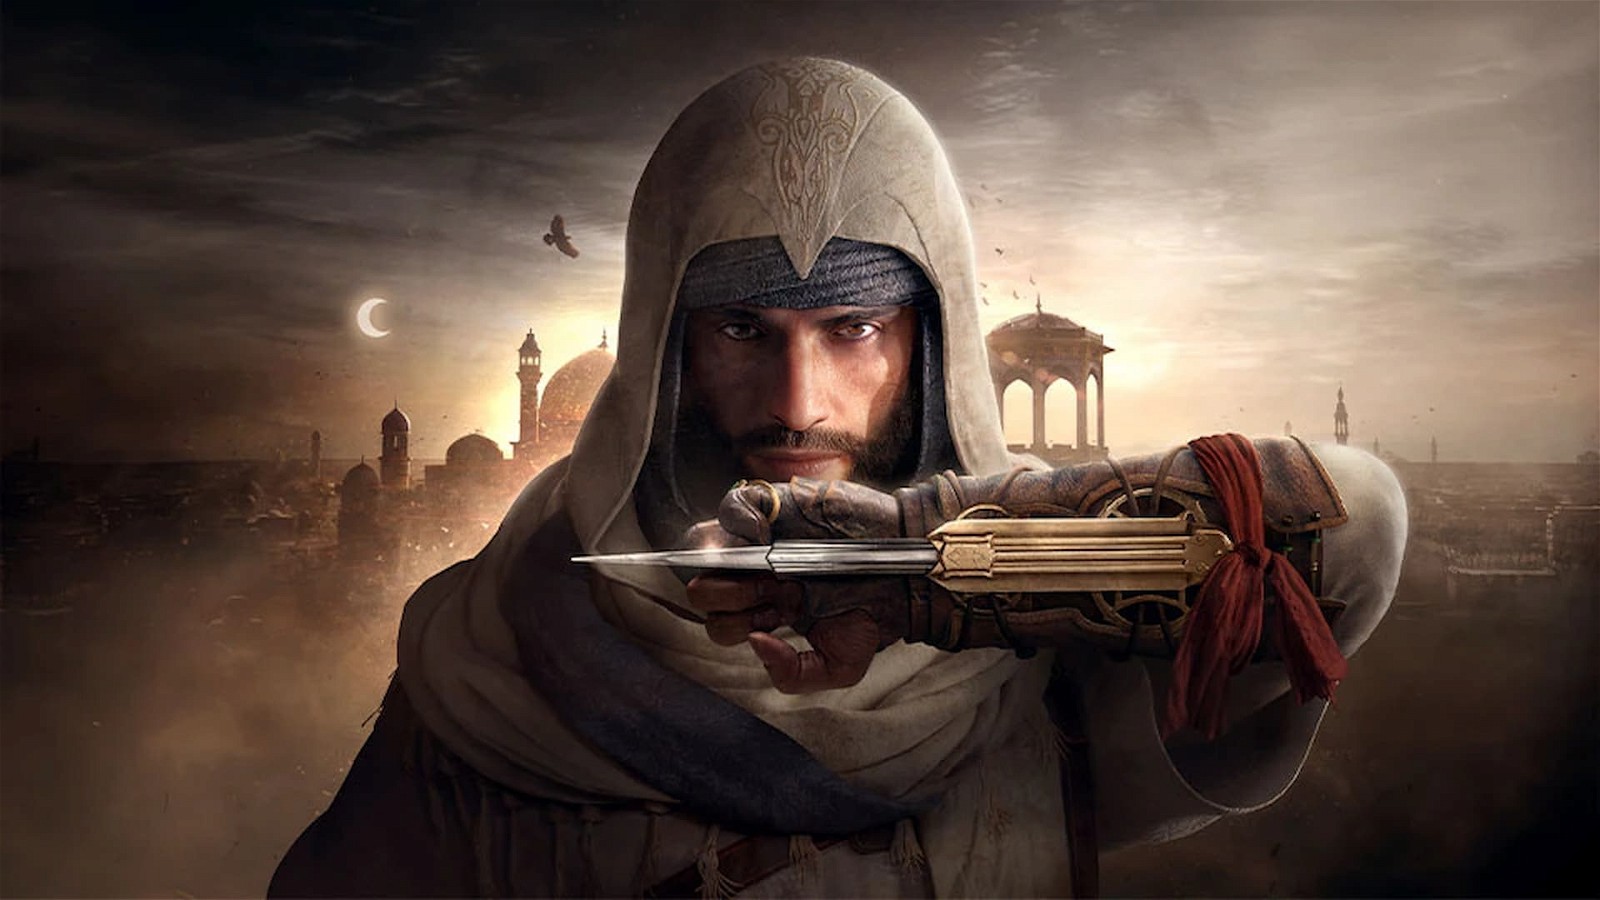 Assassin’s Creed Mirage takes place after AC Odyssey and Origins